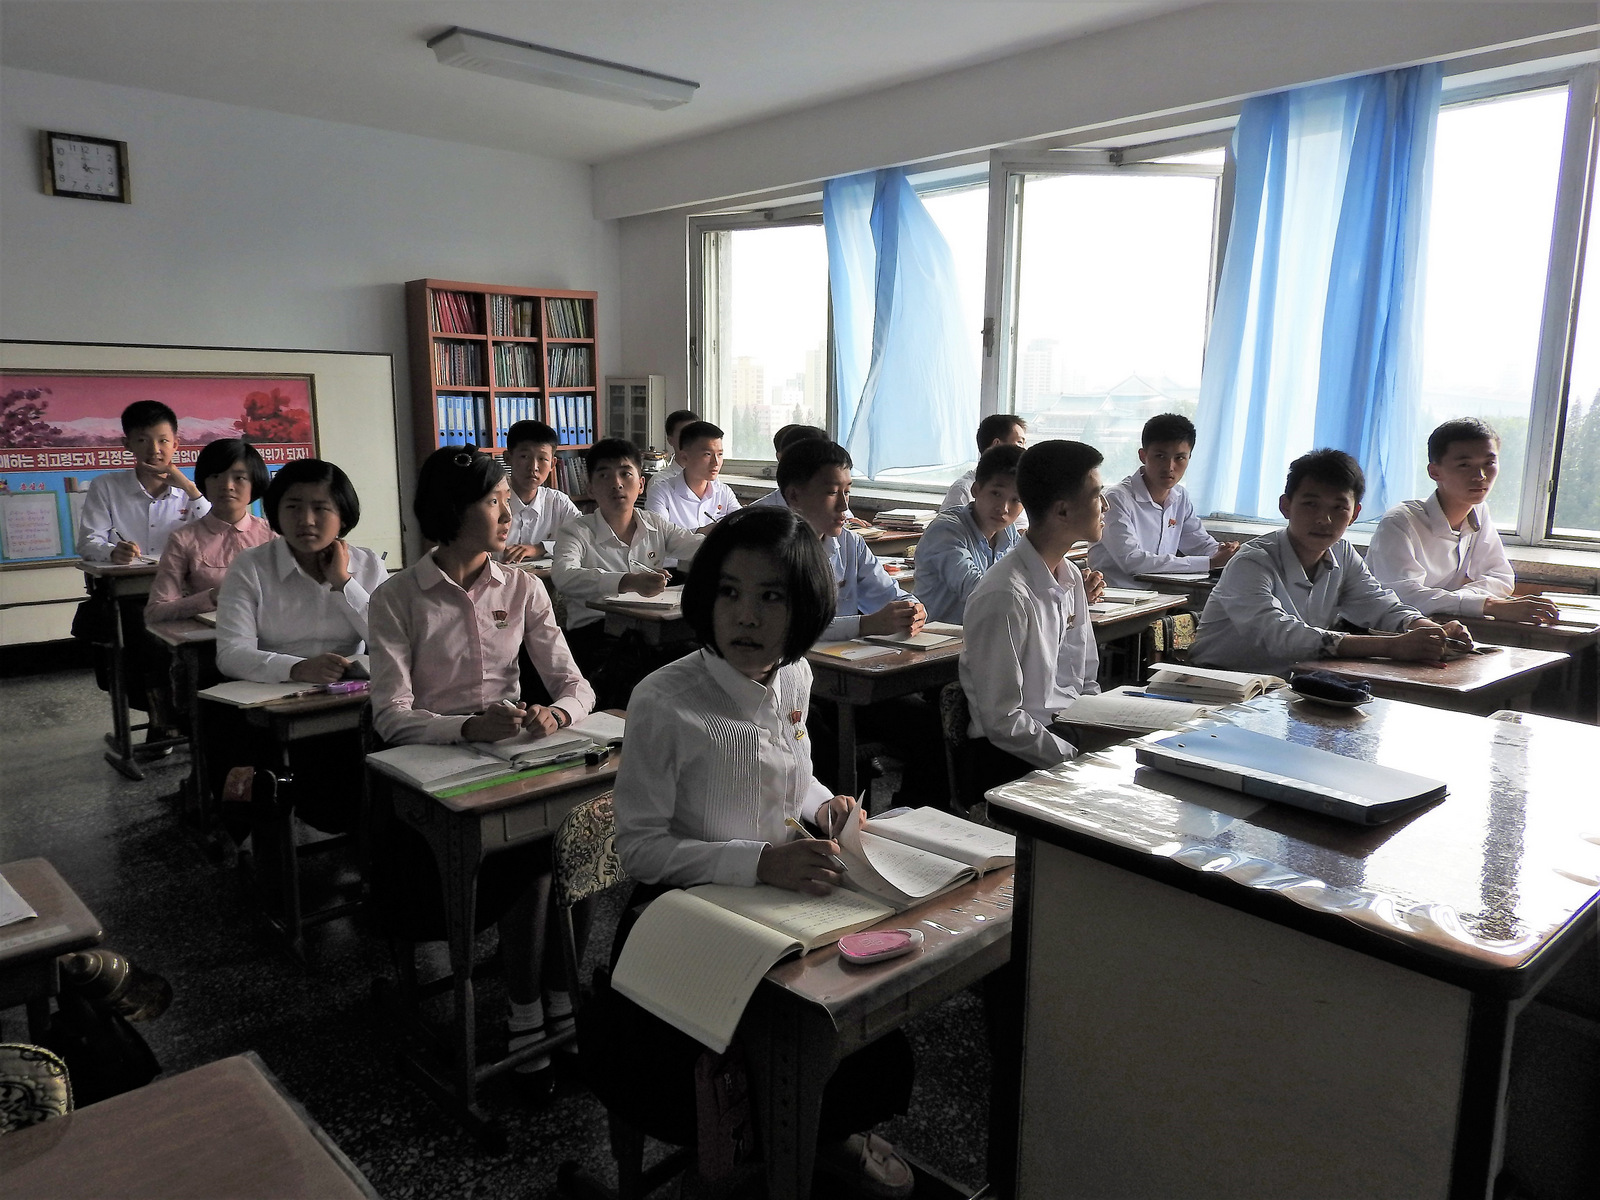 In Pyongyang Middle School. Students spoke in English of the universal desire for peace, one girl urging people to struggle for peace. On the issue of North Korea's weapons, one teenage boy said: “We make intercontinental ballistic rockets, not for invading other countries but for our national defense. To protect one's country, the country must have a powerful defense.”